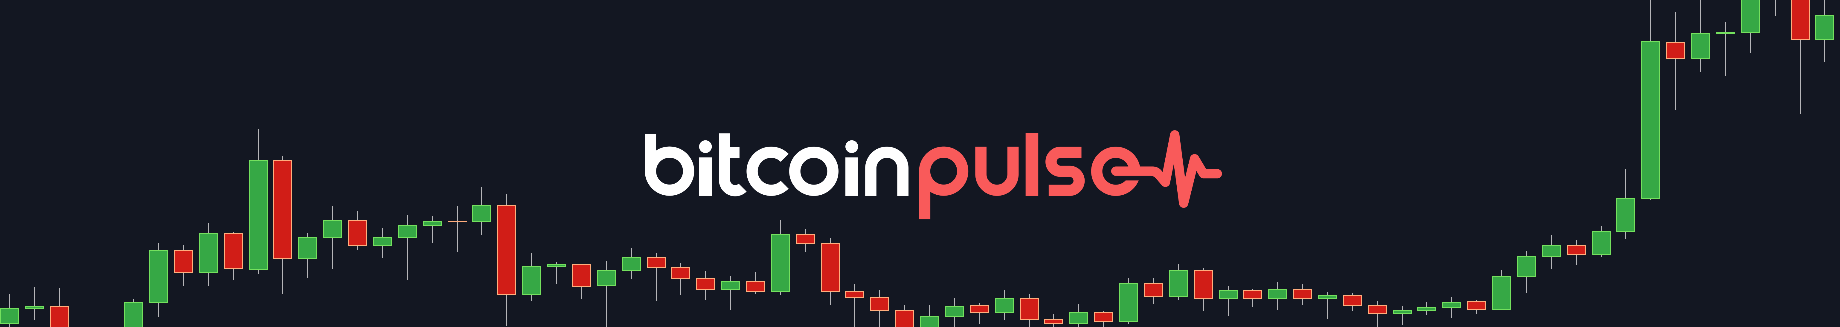 End of Month Bounce - Bitcoin Pulse #108